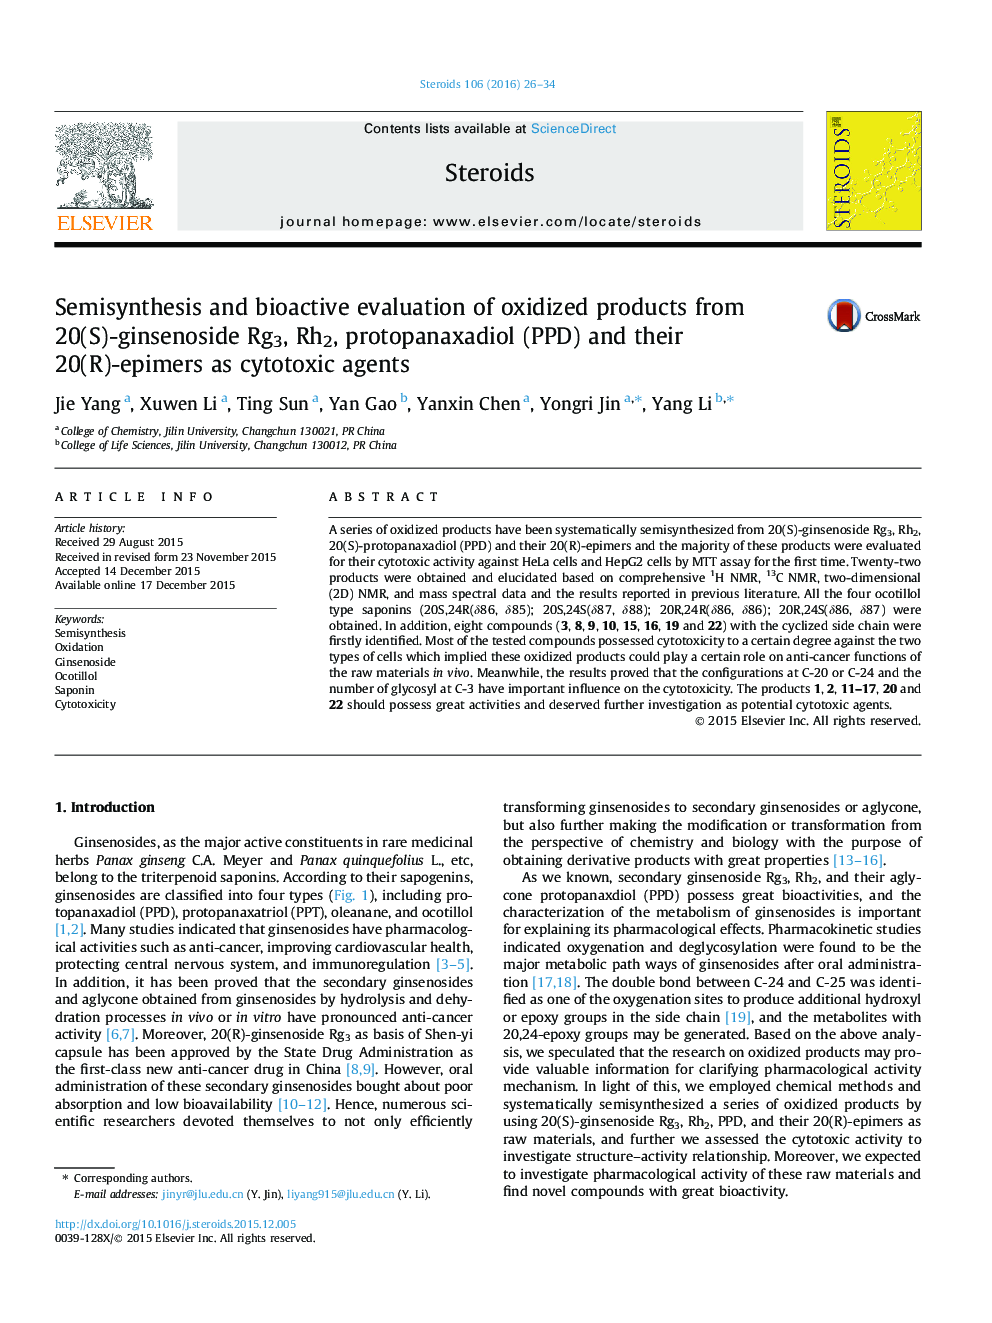 Semisynthesis and bioactive evaluation of oxidized products from 20(S)-ginsenoside Rg3, Rh2, protopanaxadiol (PPD) and their 20(R)-epimers as cytotoxic agents